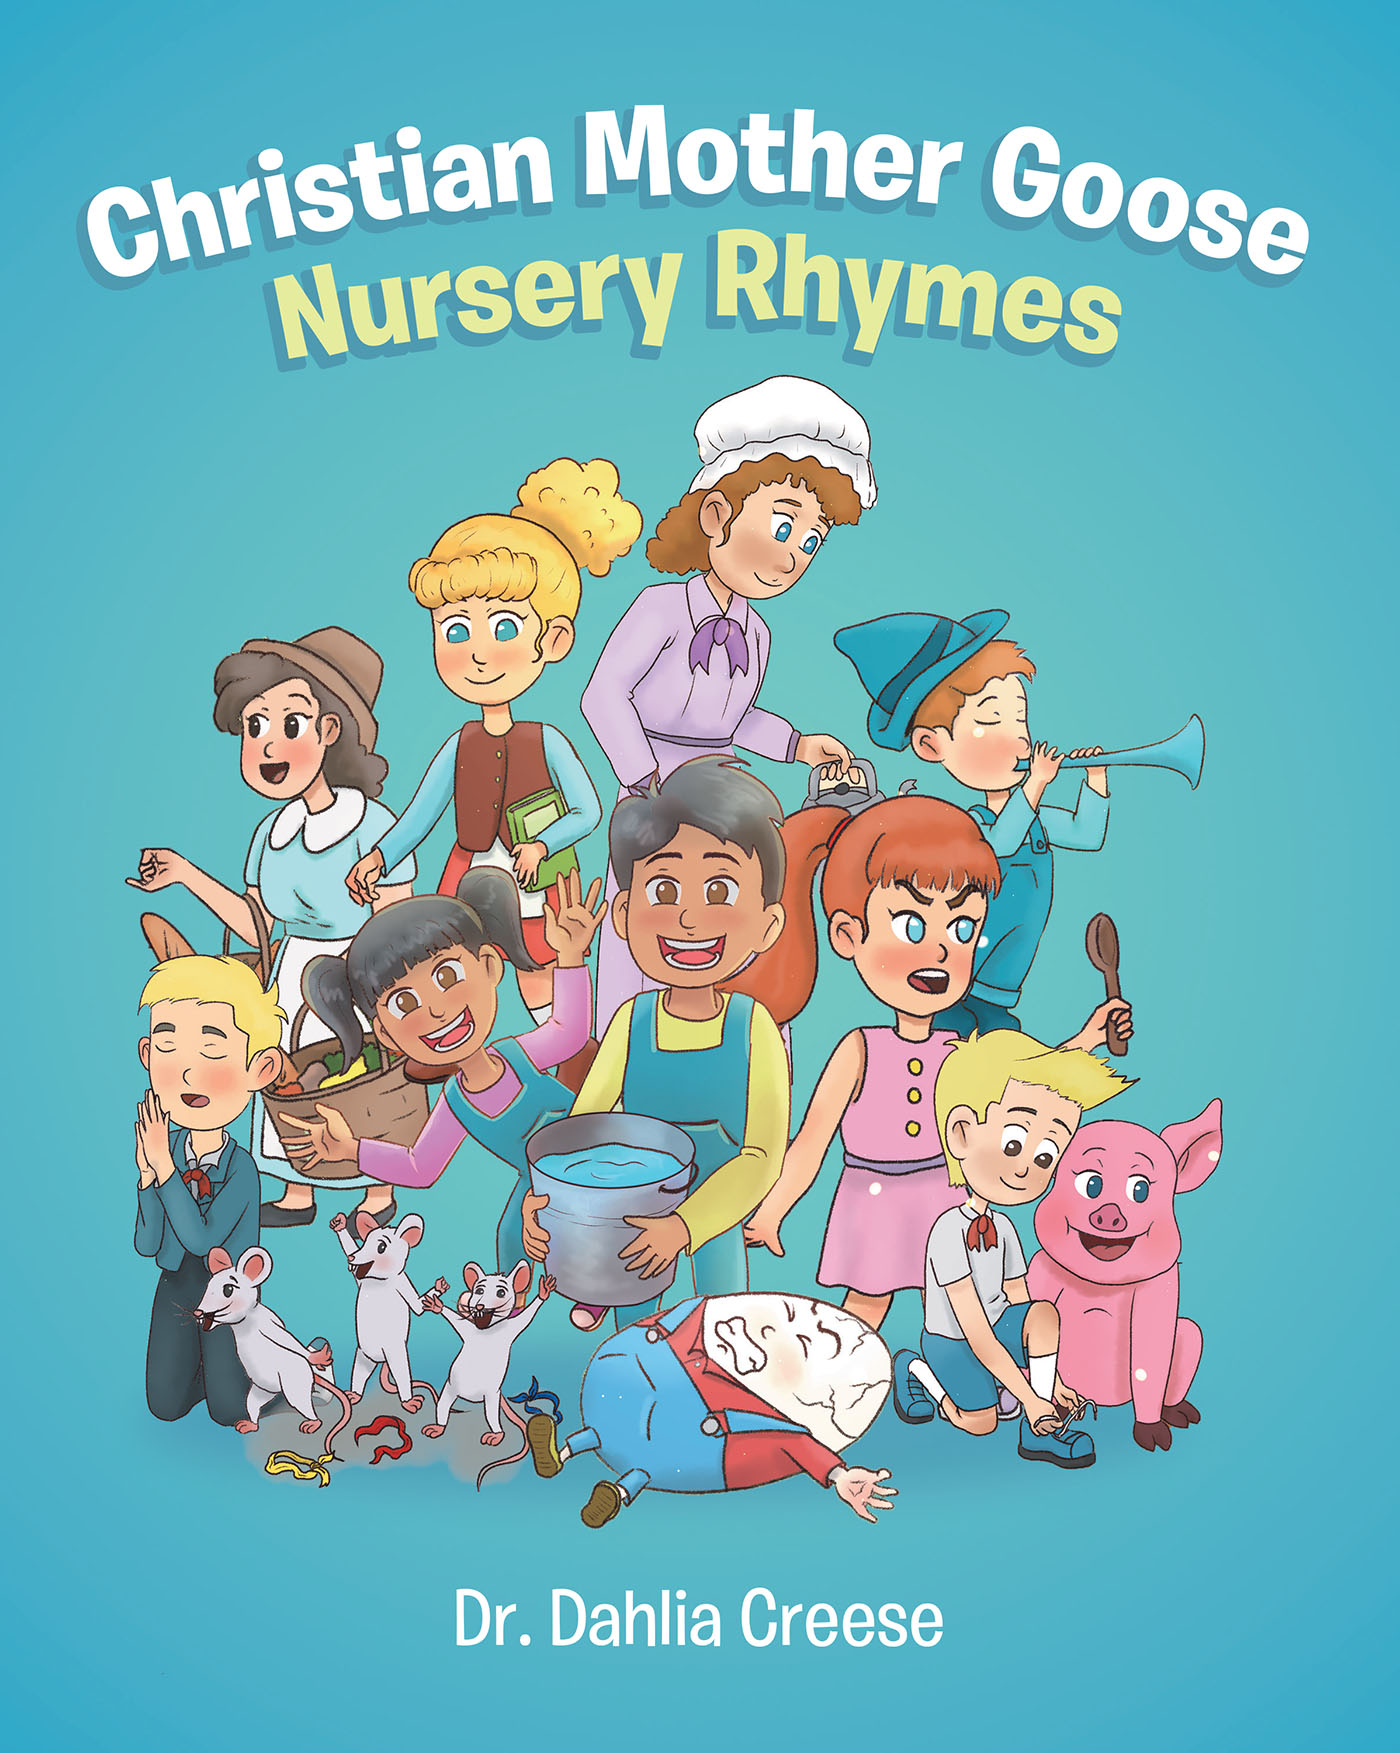 Author Dr. Dahlia Creese’s New Book, "Christian Mother Goose Nursery Rhymes," is a Classic Children’s Book That Fosters a Love of Reading in Readers of All Ages